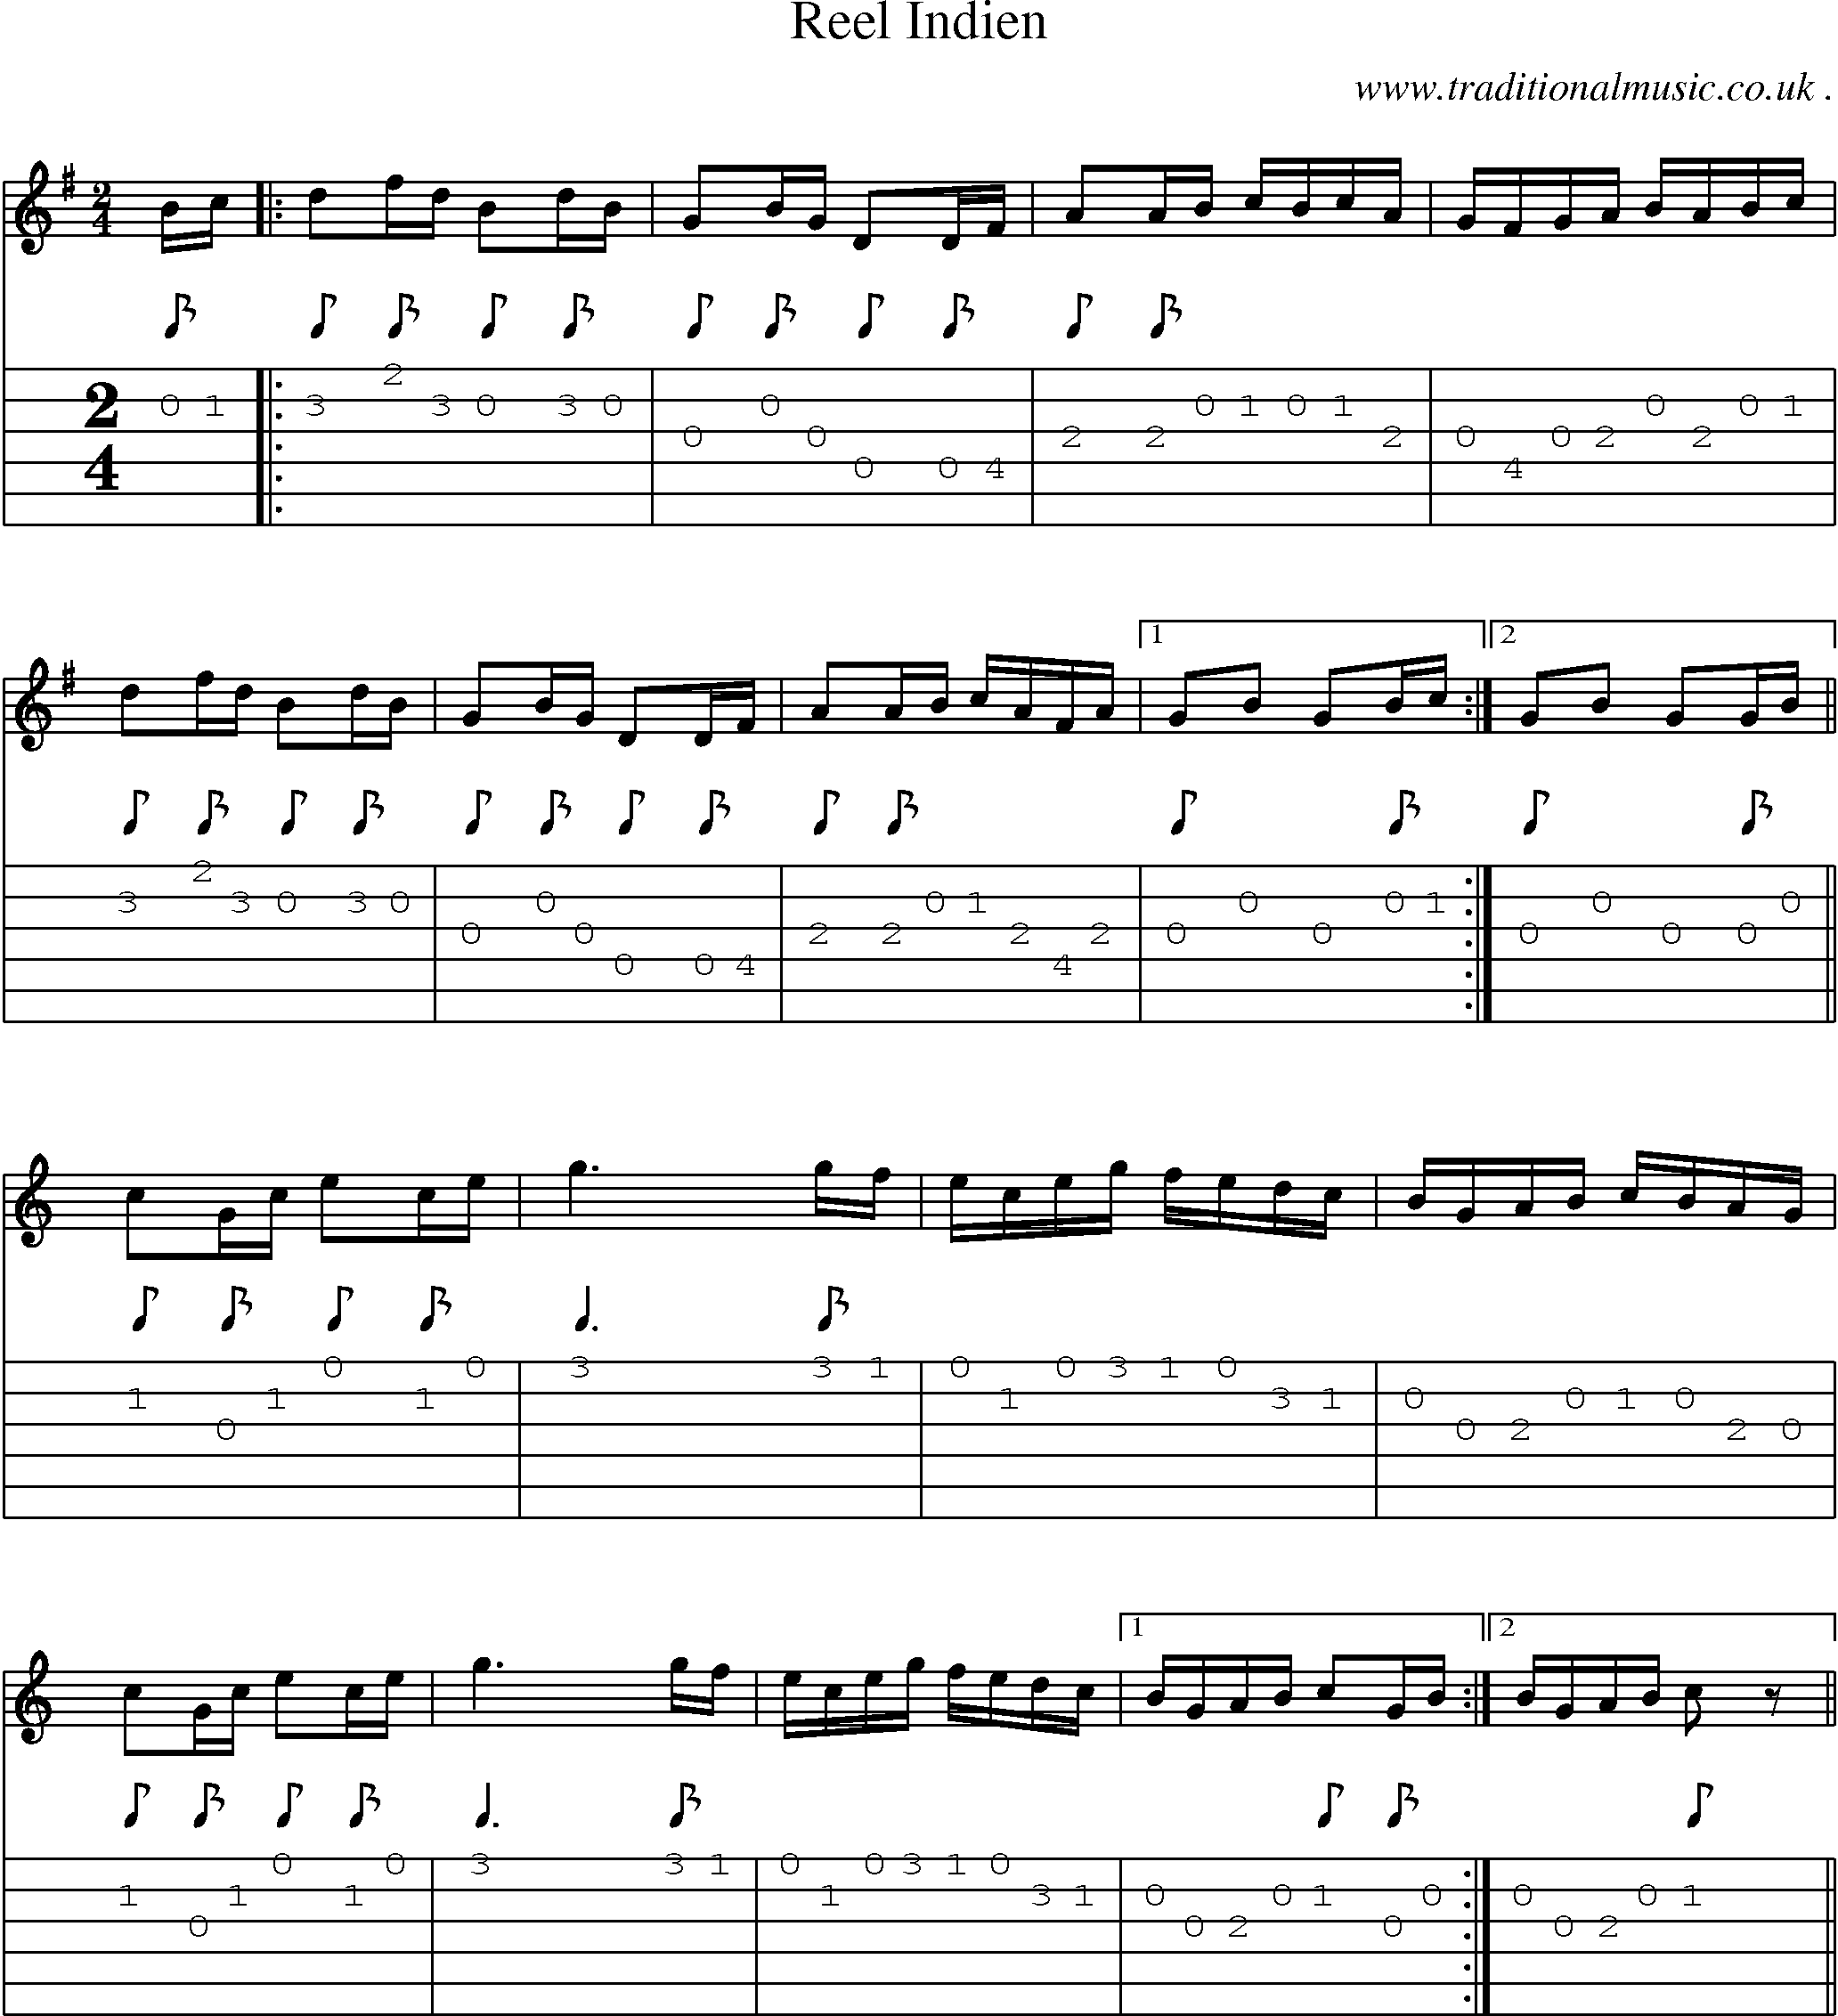 Sheet-Music and Guitar Tabs for Reel Indien